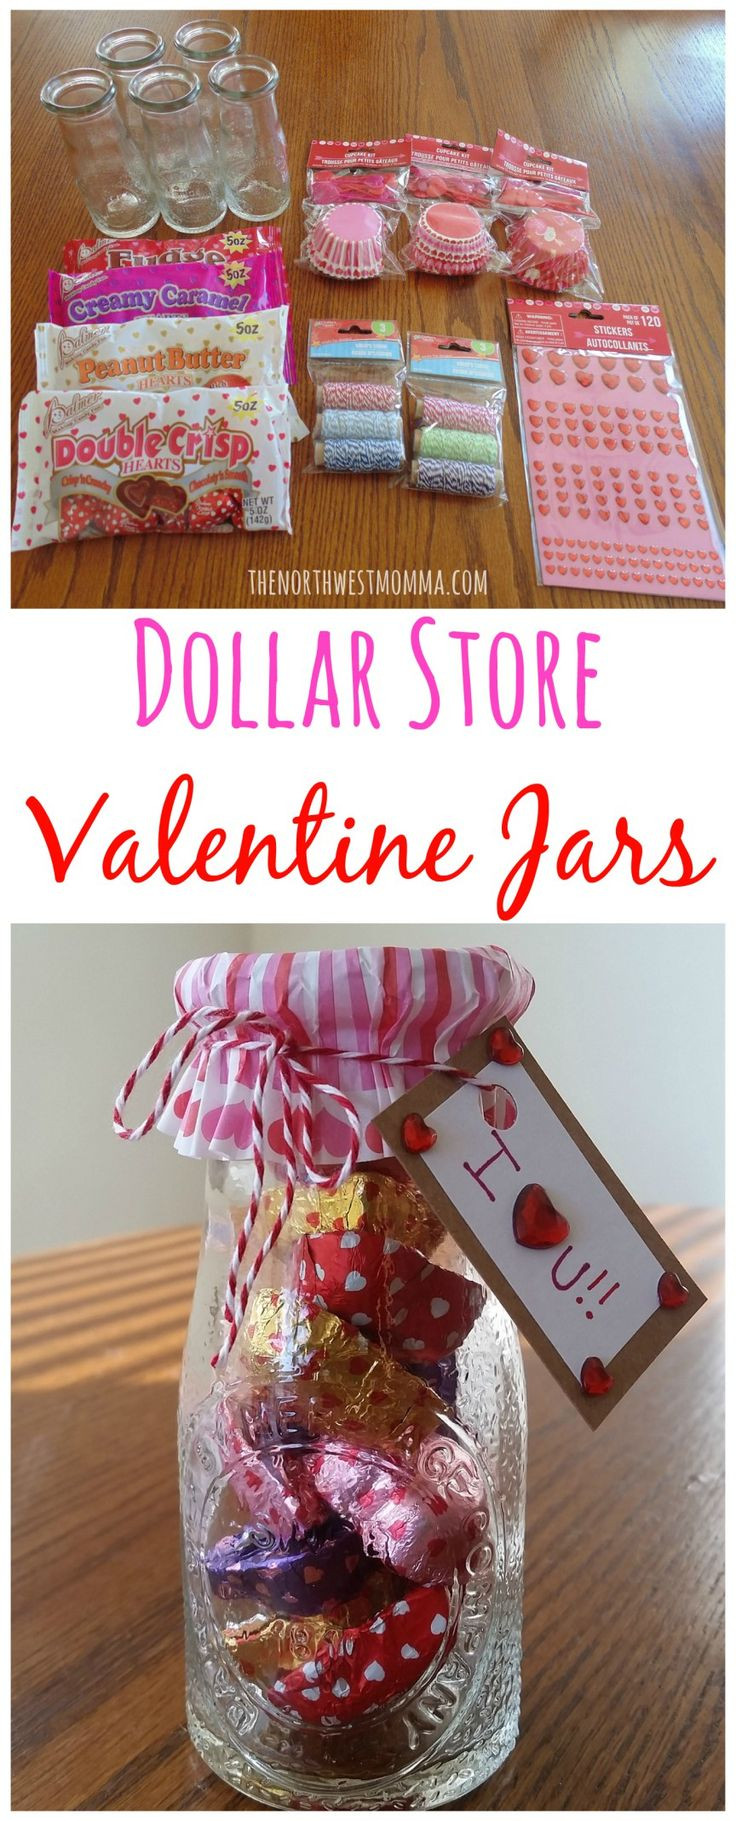 Valentine Gift Ideas For Child
 12 best images about Valentines Day on Pinterest